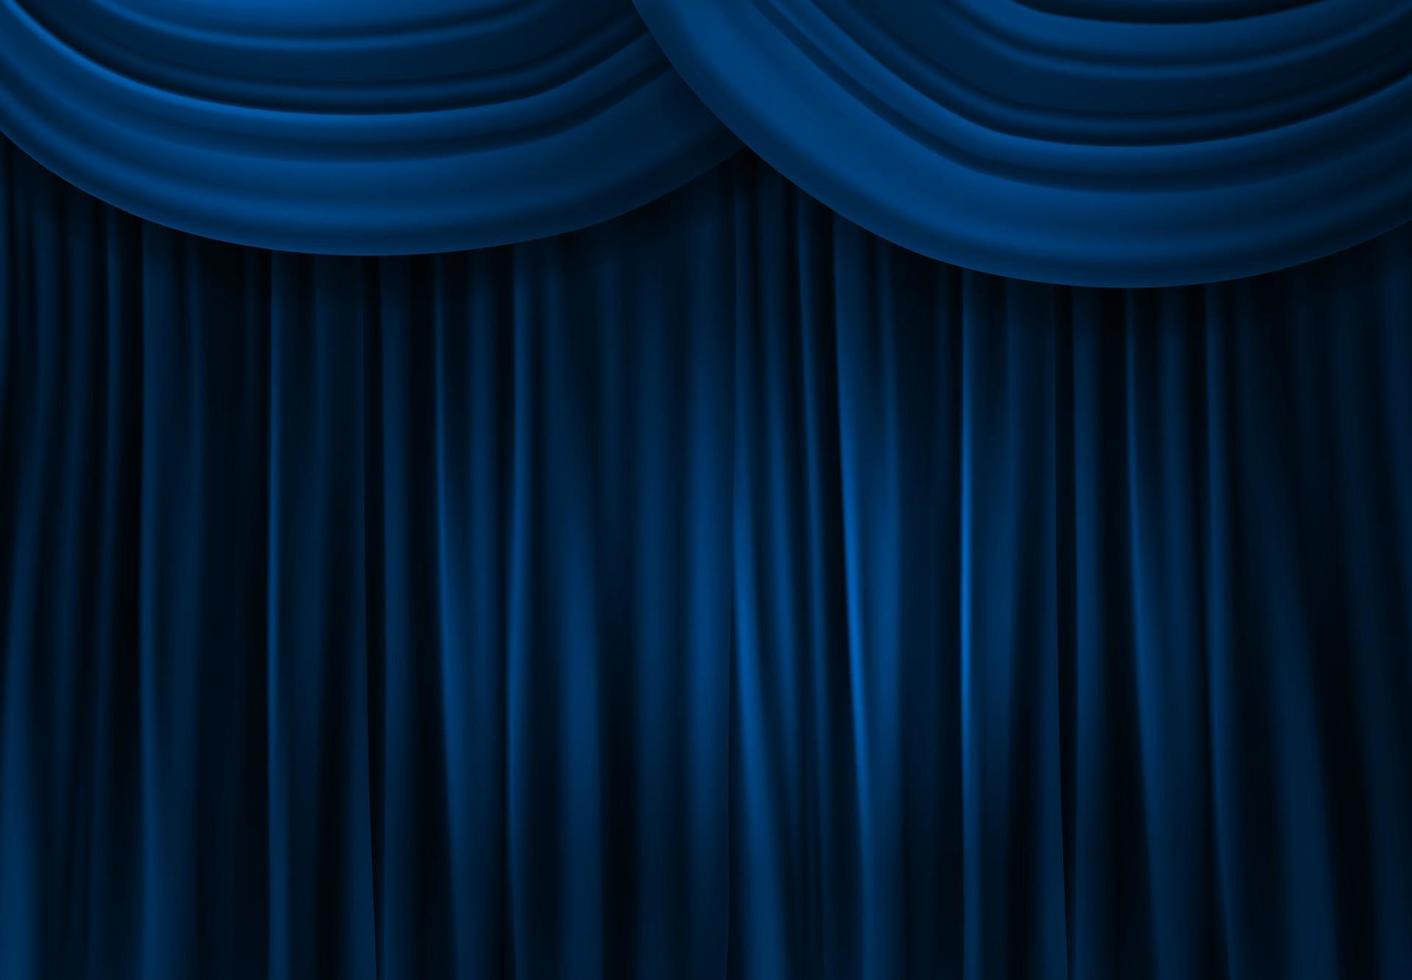 Blue Curtain Closes on Stage Background. Vector Illustration